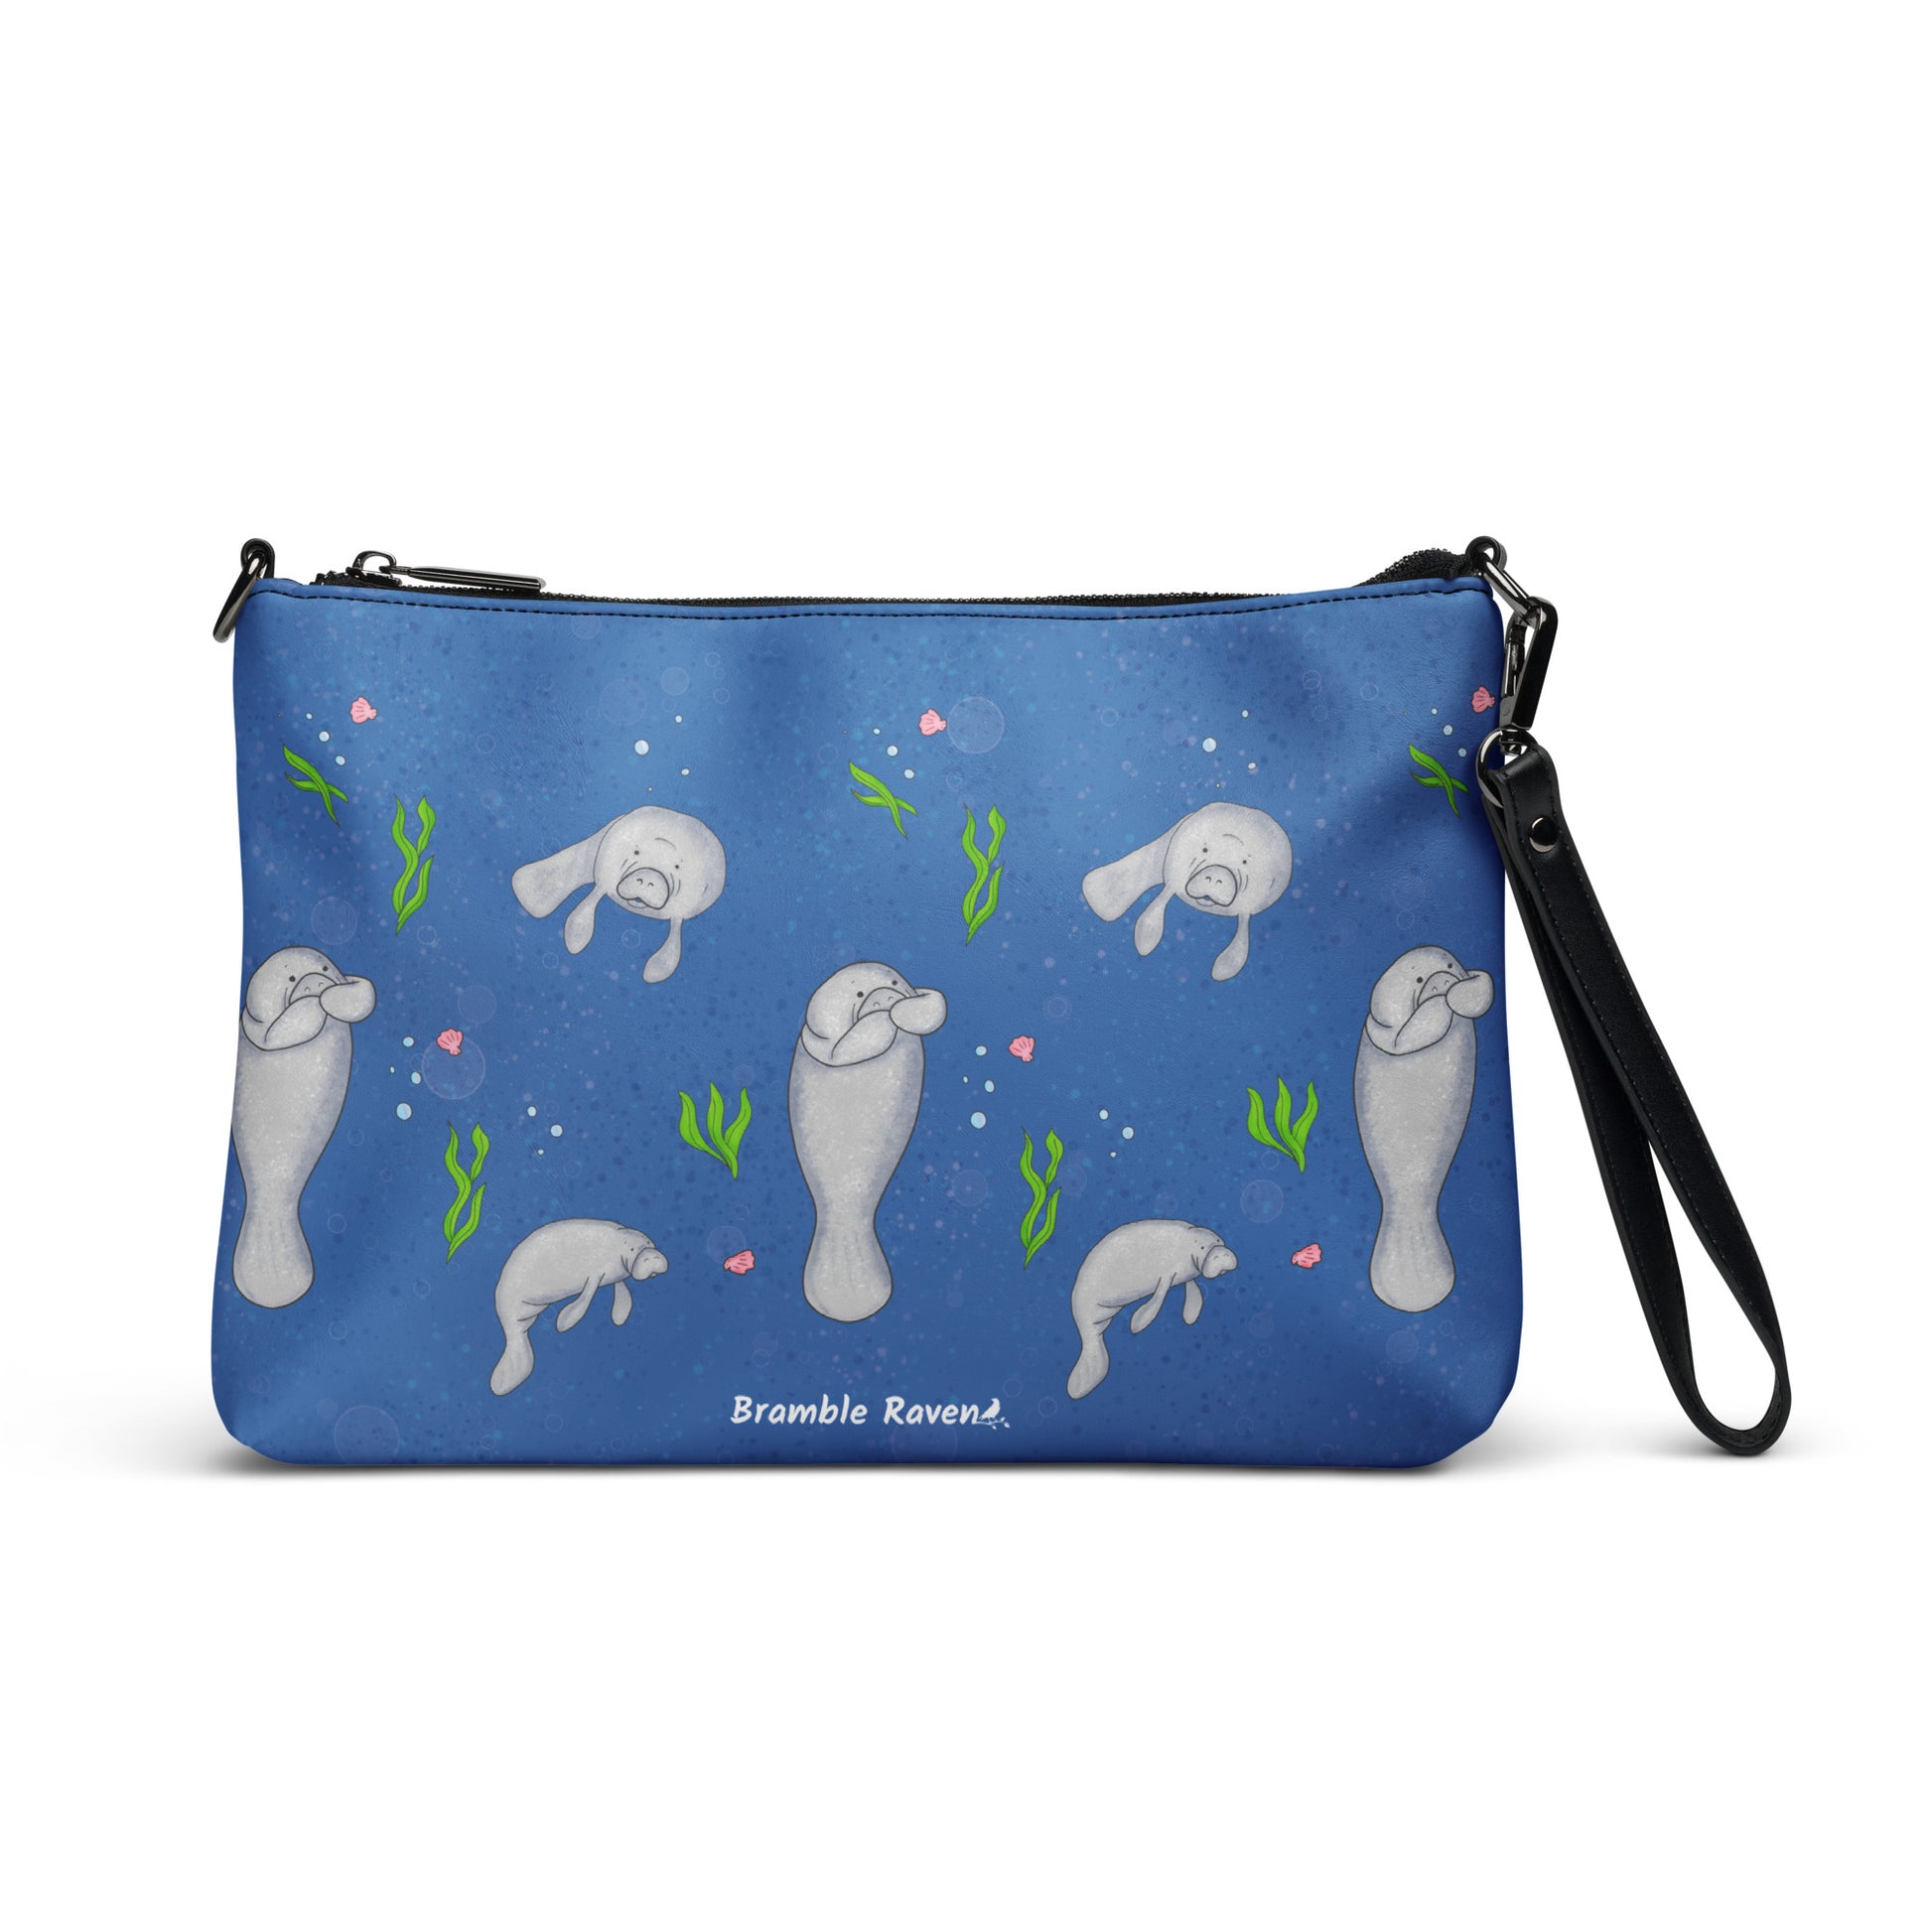 Manatee crossbody bag. Faux leather with polyester lining and dark grey hardware. Comes with adjustable removable wrist and shoulder straps. Front view of bag with manatees on a dark blue background.